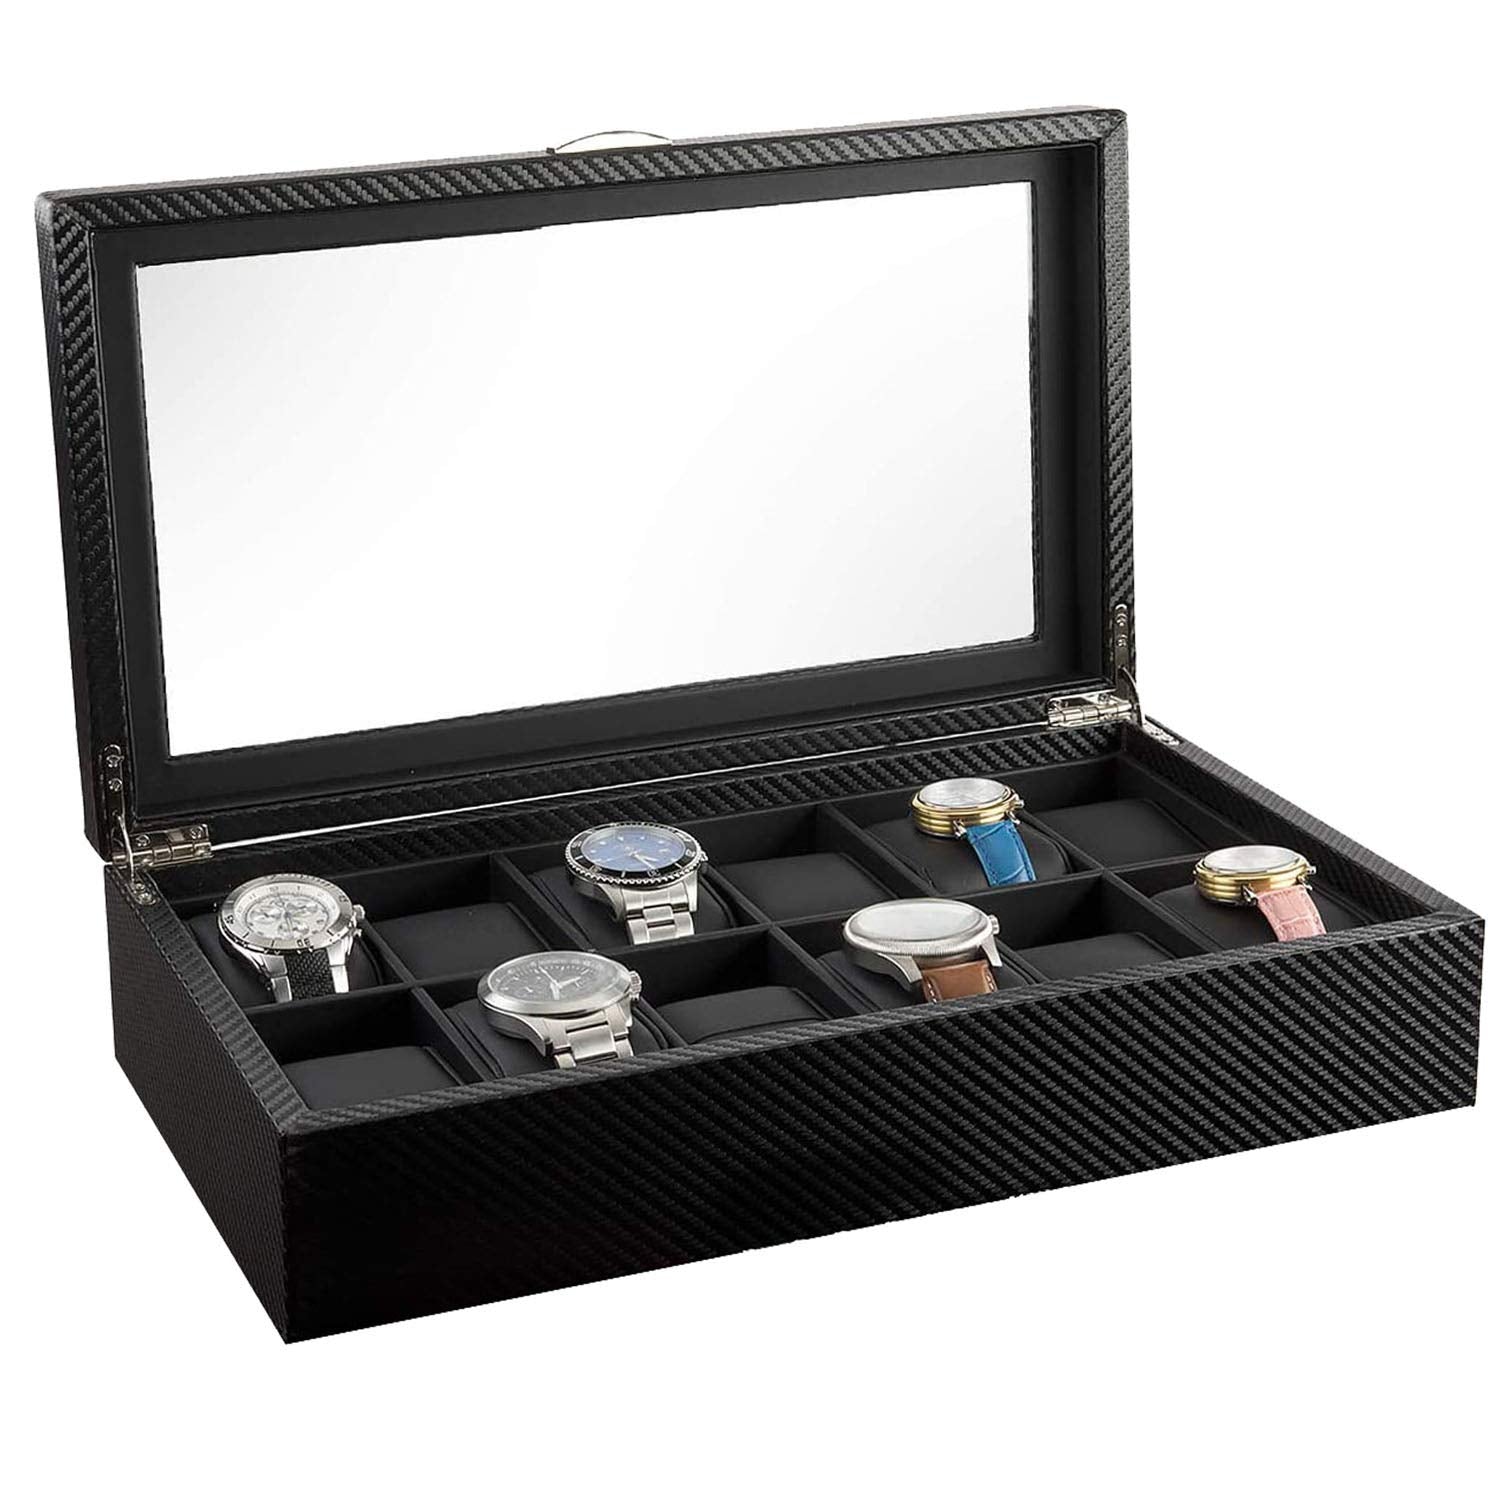 HAUTEROW Watch Box- Display Case & Organizer For Men| First-Class Jewelry Watch Holder| 12 Watch Slots| Sleek Black Color, Glass Top, Carbon Fiber, & Faux Leather  - Good